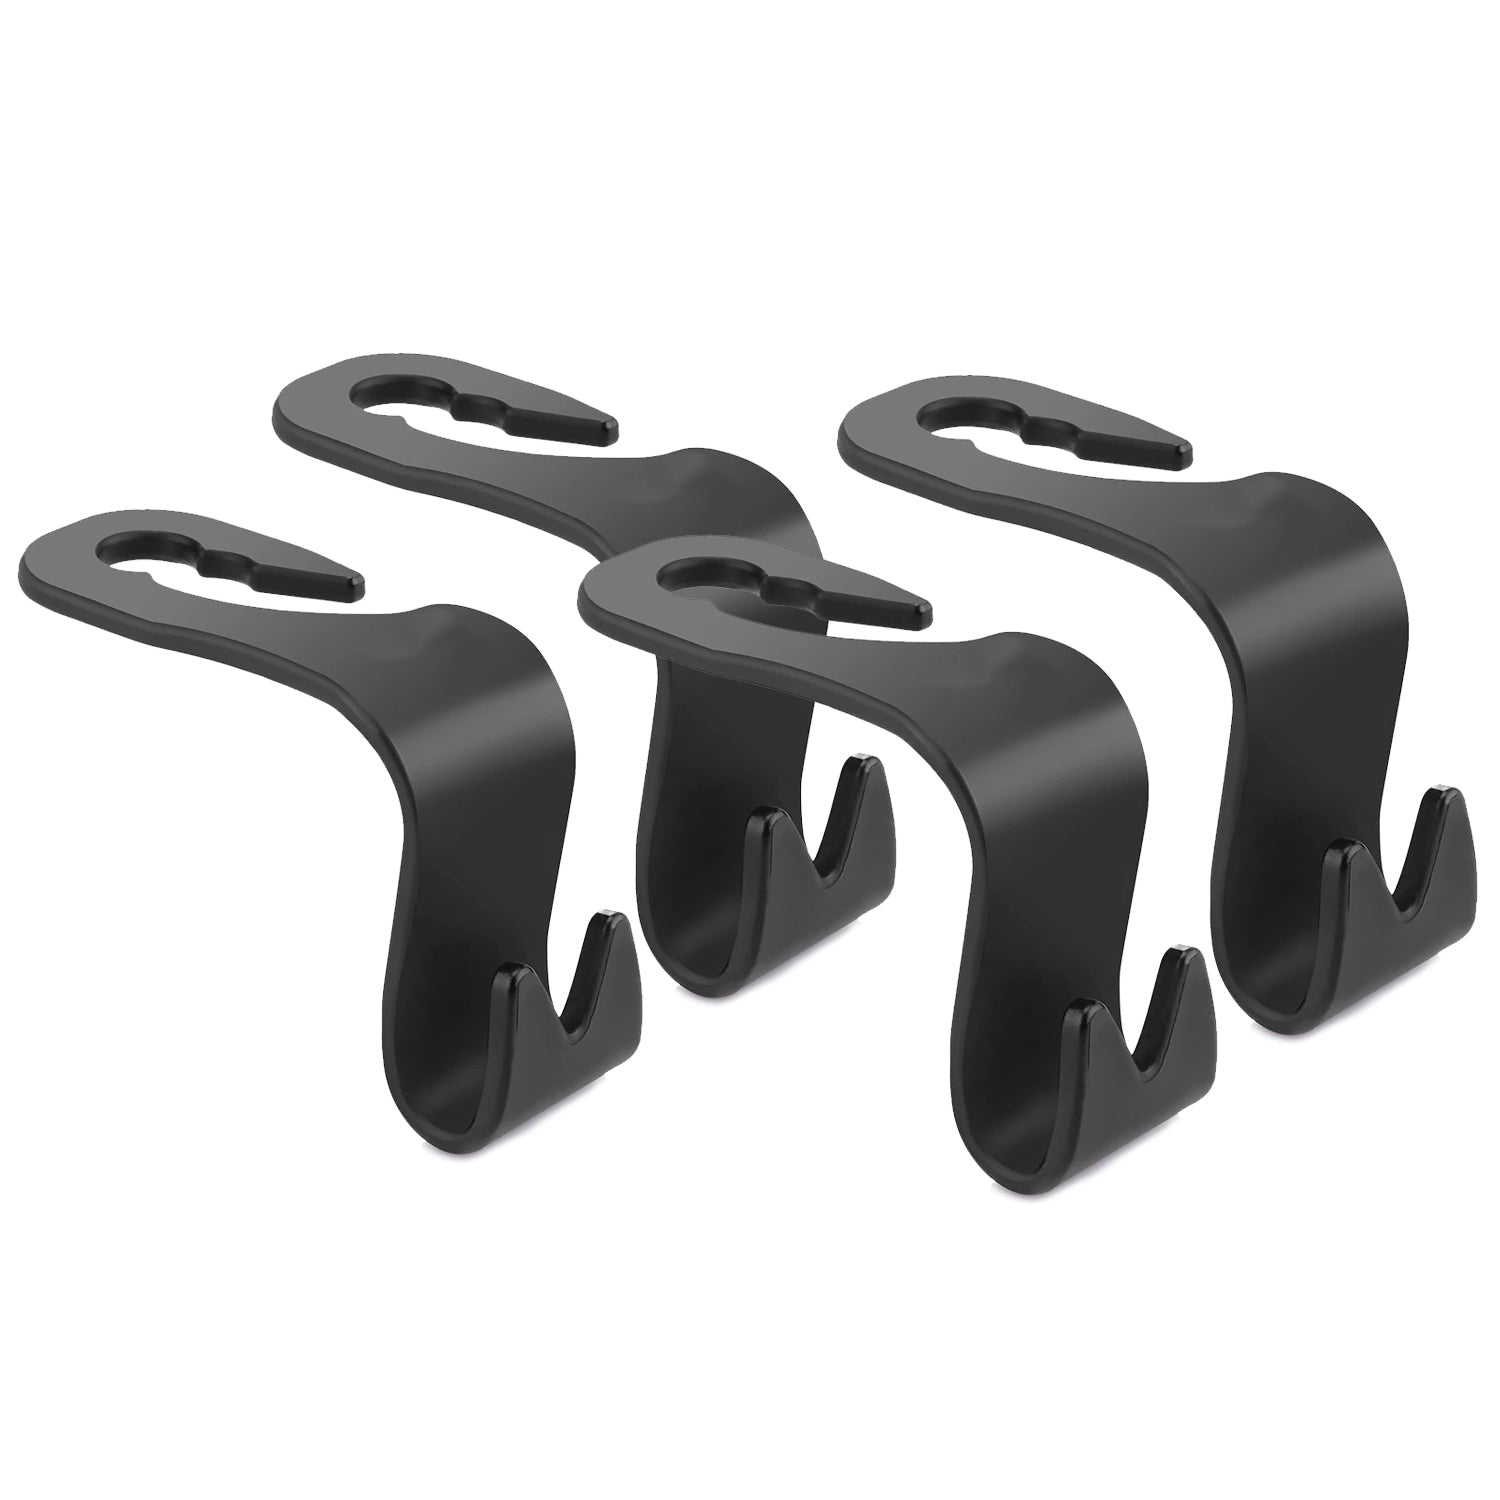 9005 Car Backrest Hanger and backrest stand for giving support and stance to drivers. DeoDap